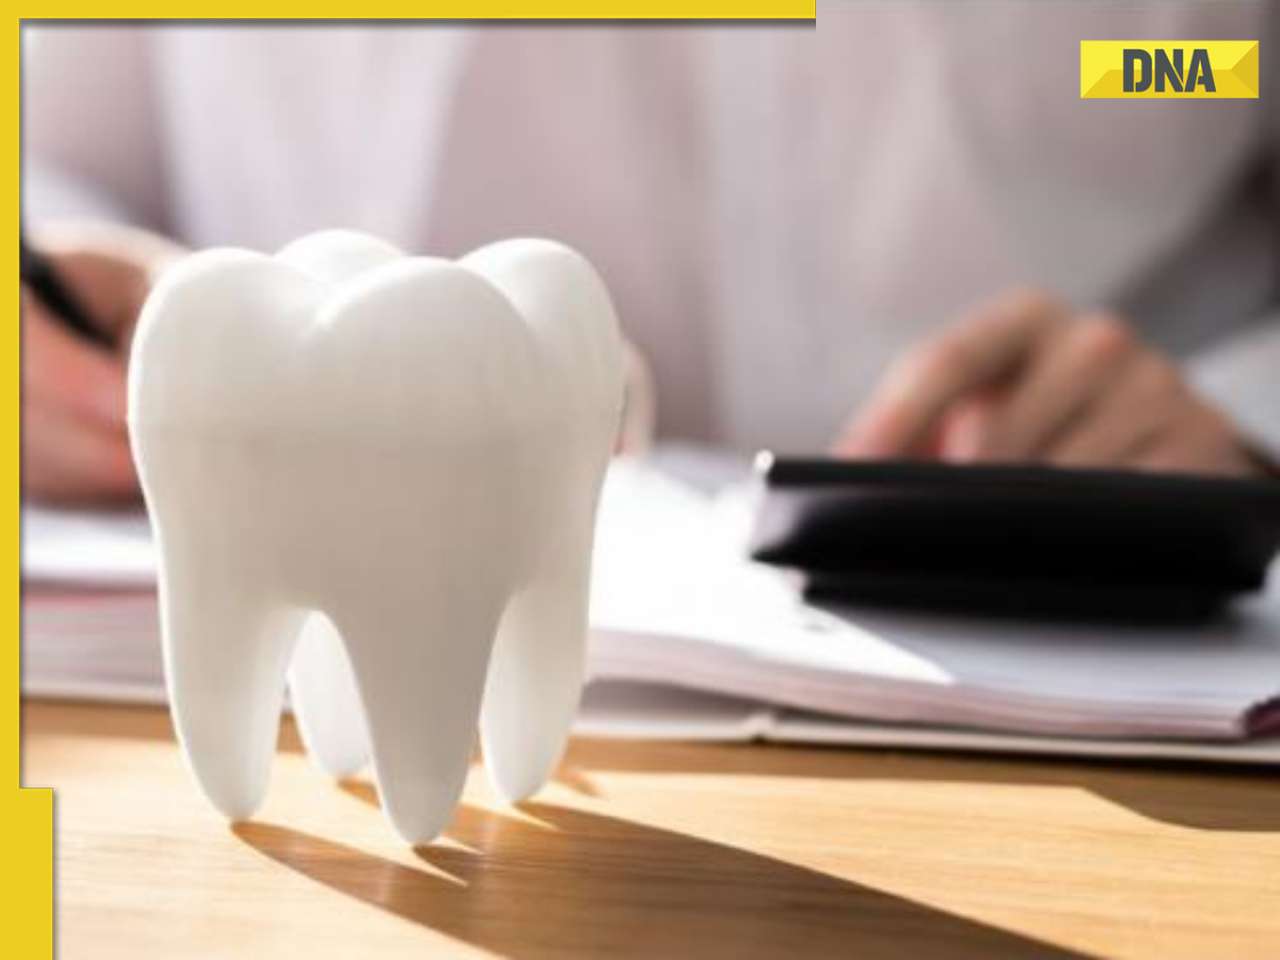 Dentalkart: A decade of growth in the Indian dental industry 